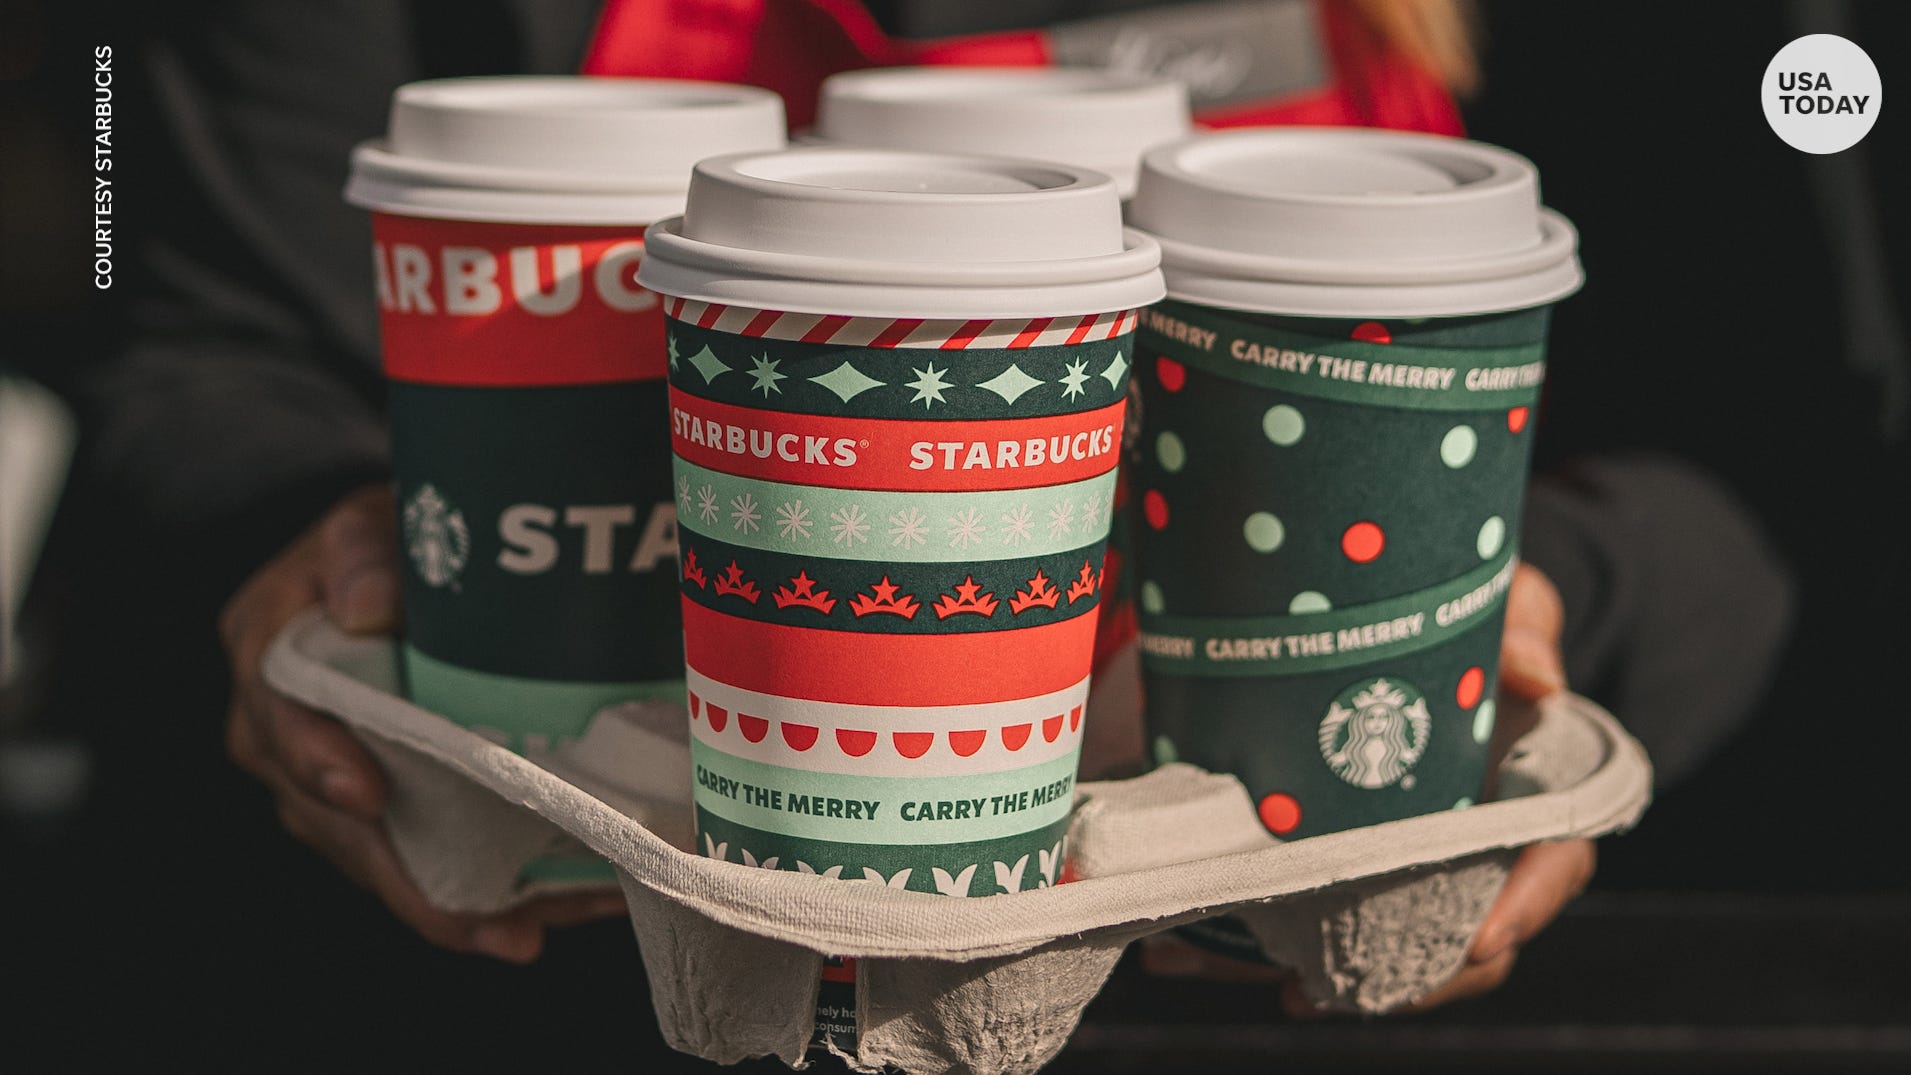 Starbucks Cyber Monday Freebies Get A Free Drink And A Free Gift Card